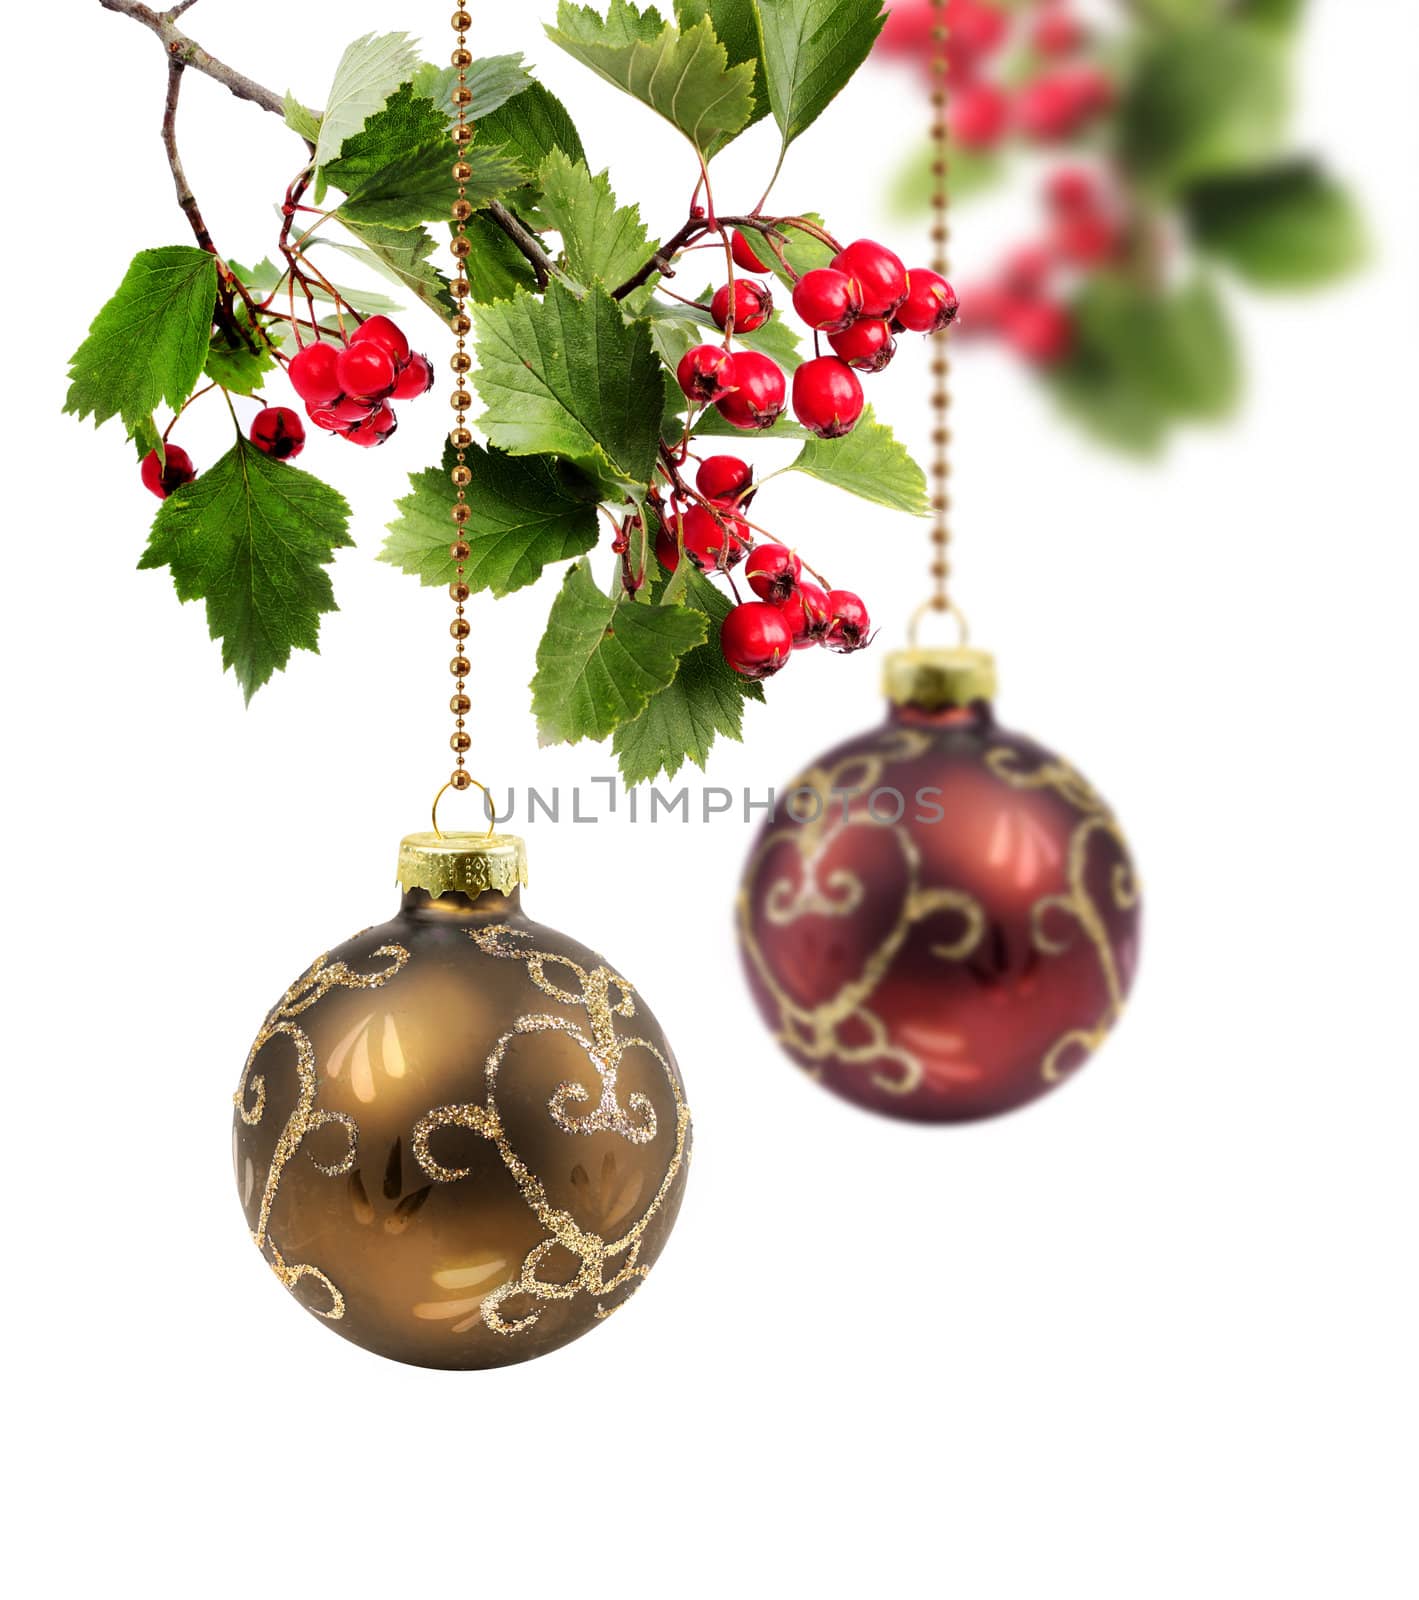 Red and golden Christmas balls with hawthorn berries branch, isolated on white